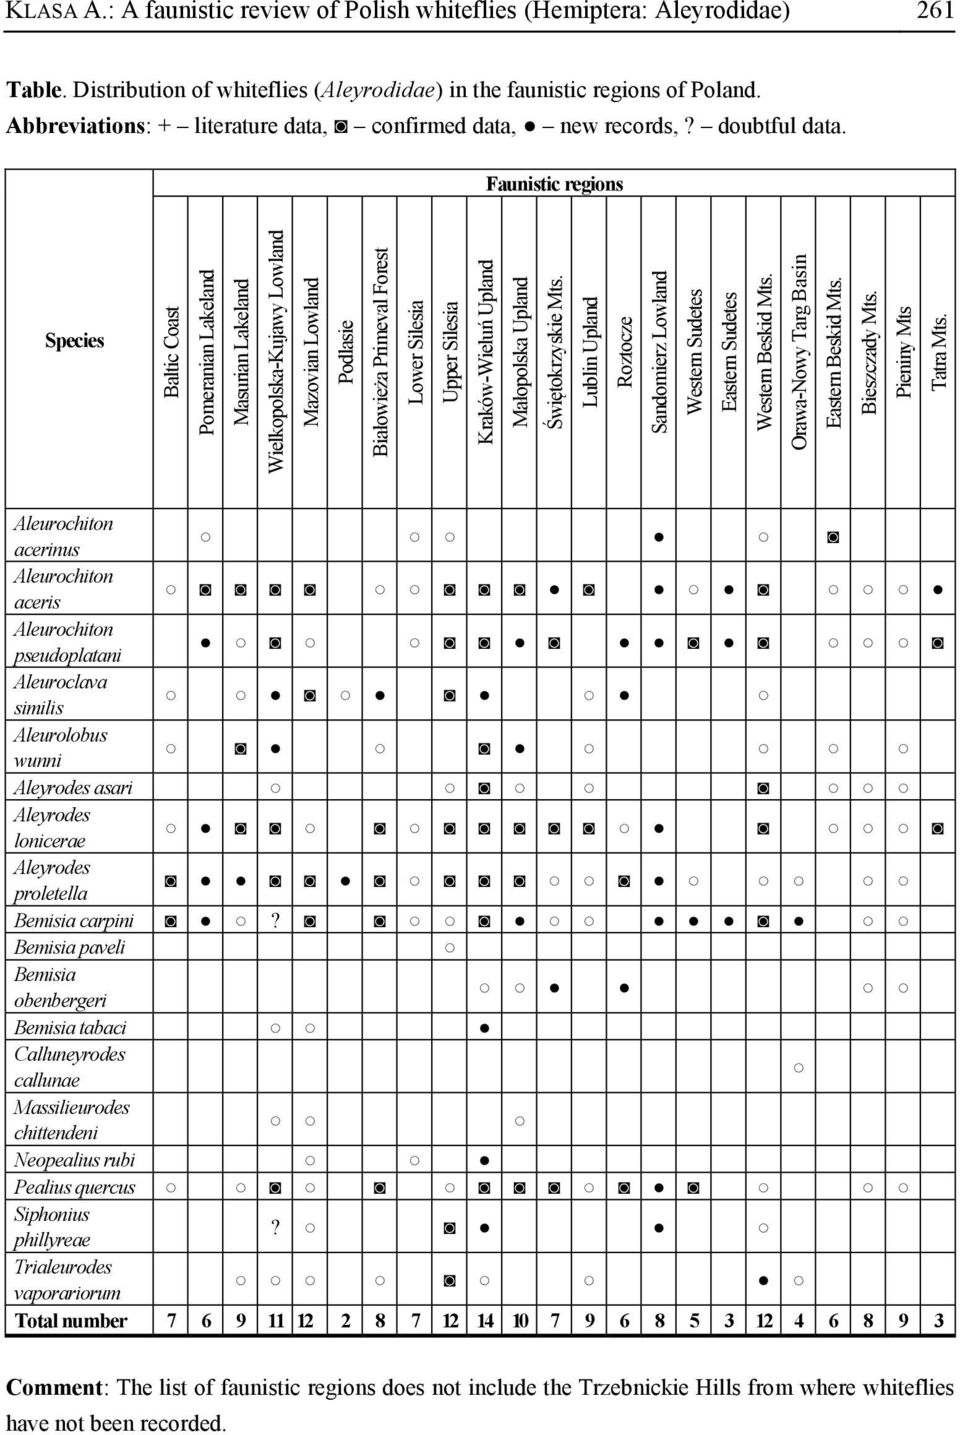 KLASA A.: A faunistic review of Polish whiteflies (Hemiptera: Aleyrodidae) 261 Table. Distribution of whiteflies (Aleyrodidae) in the faunistic regions of Poland.